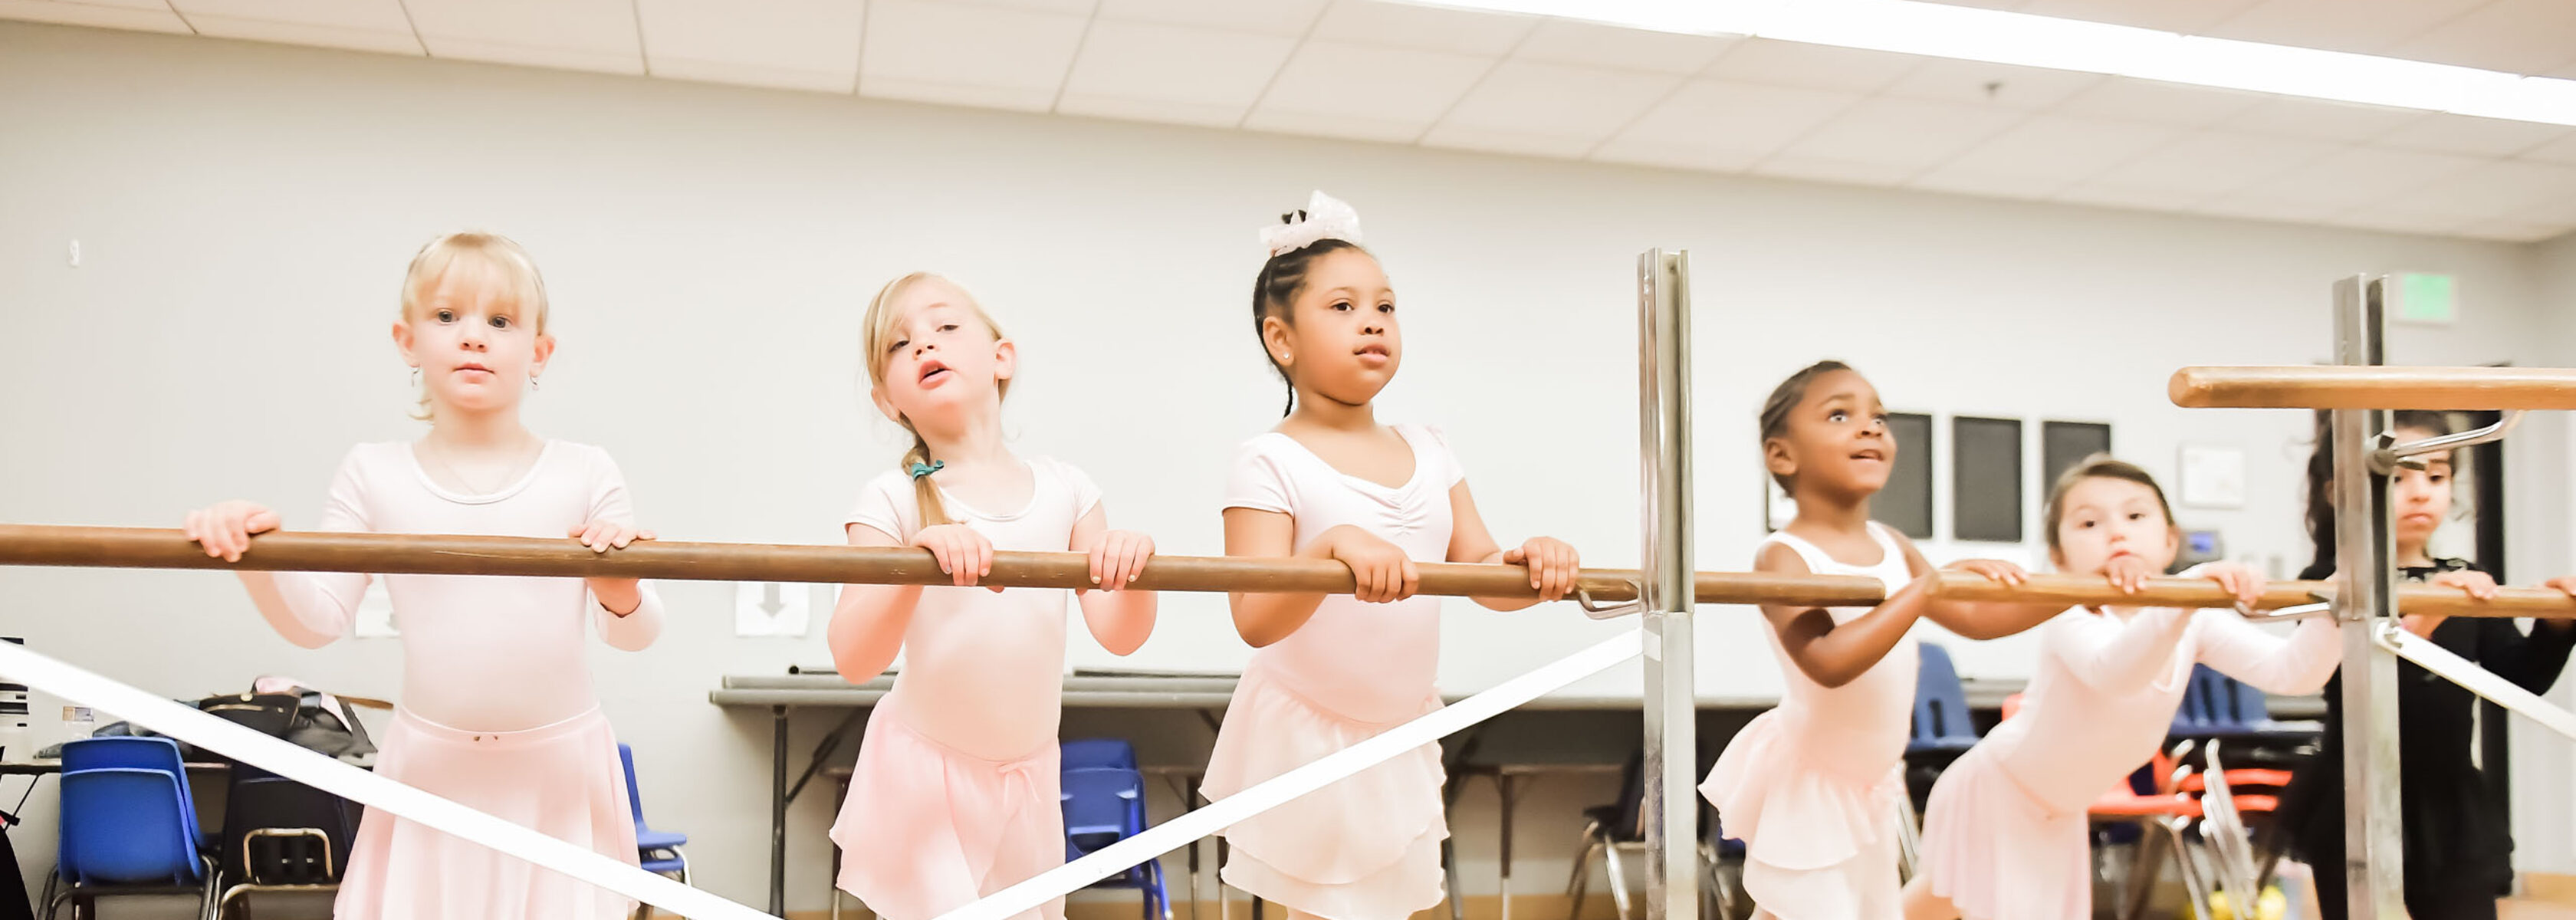 young ballerinas on barre in class.